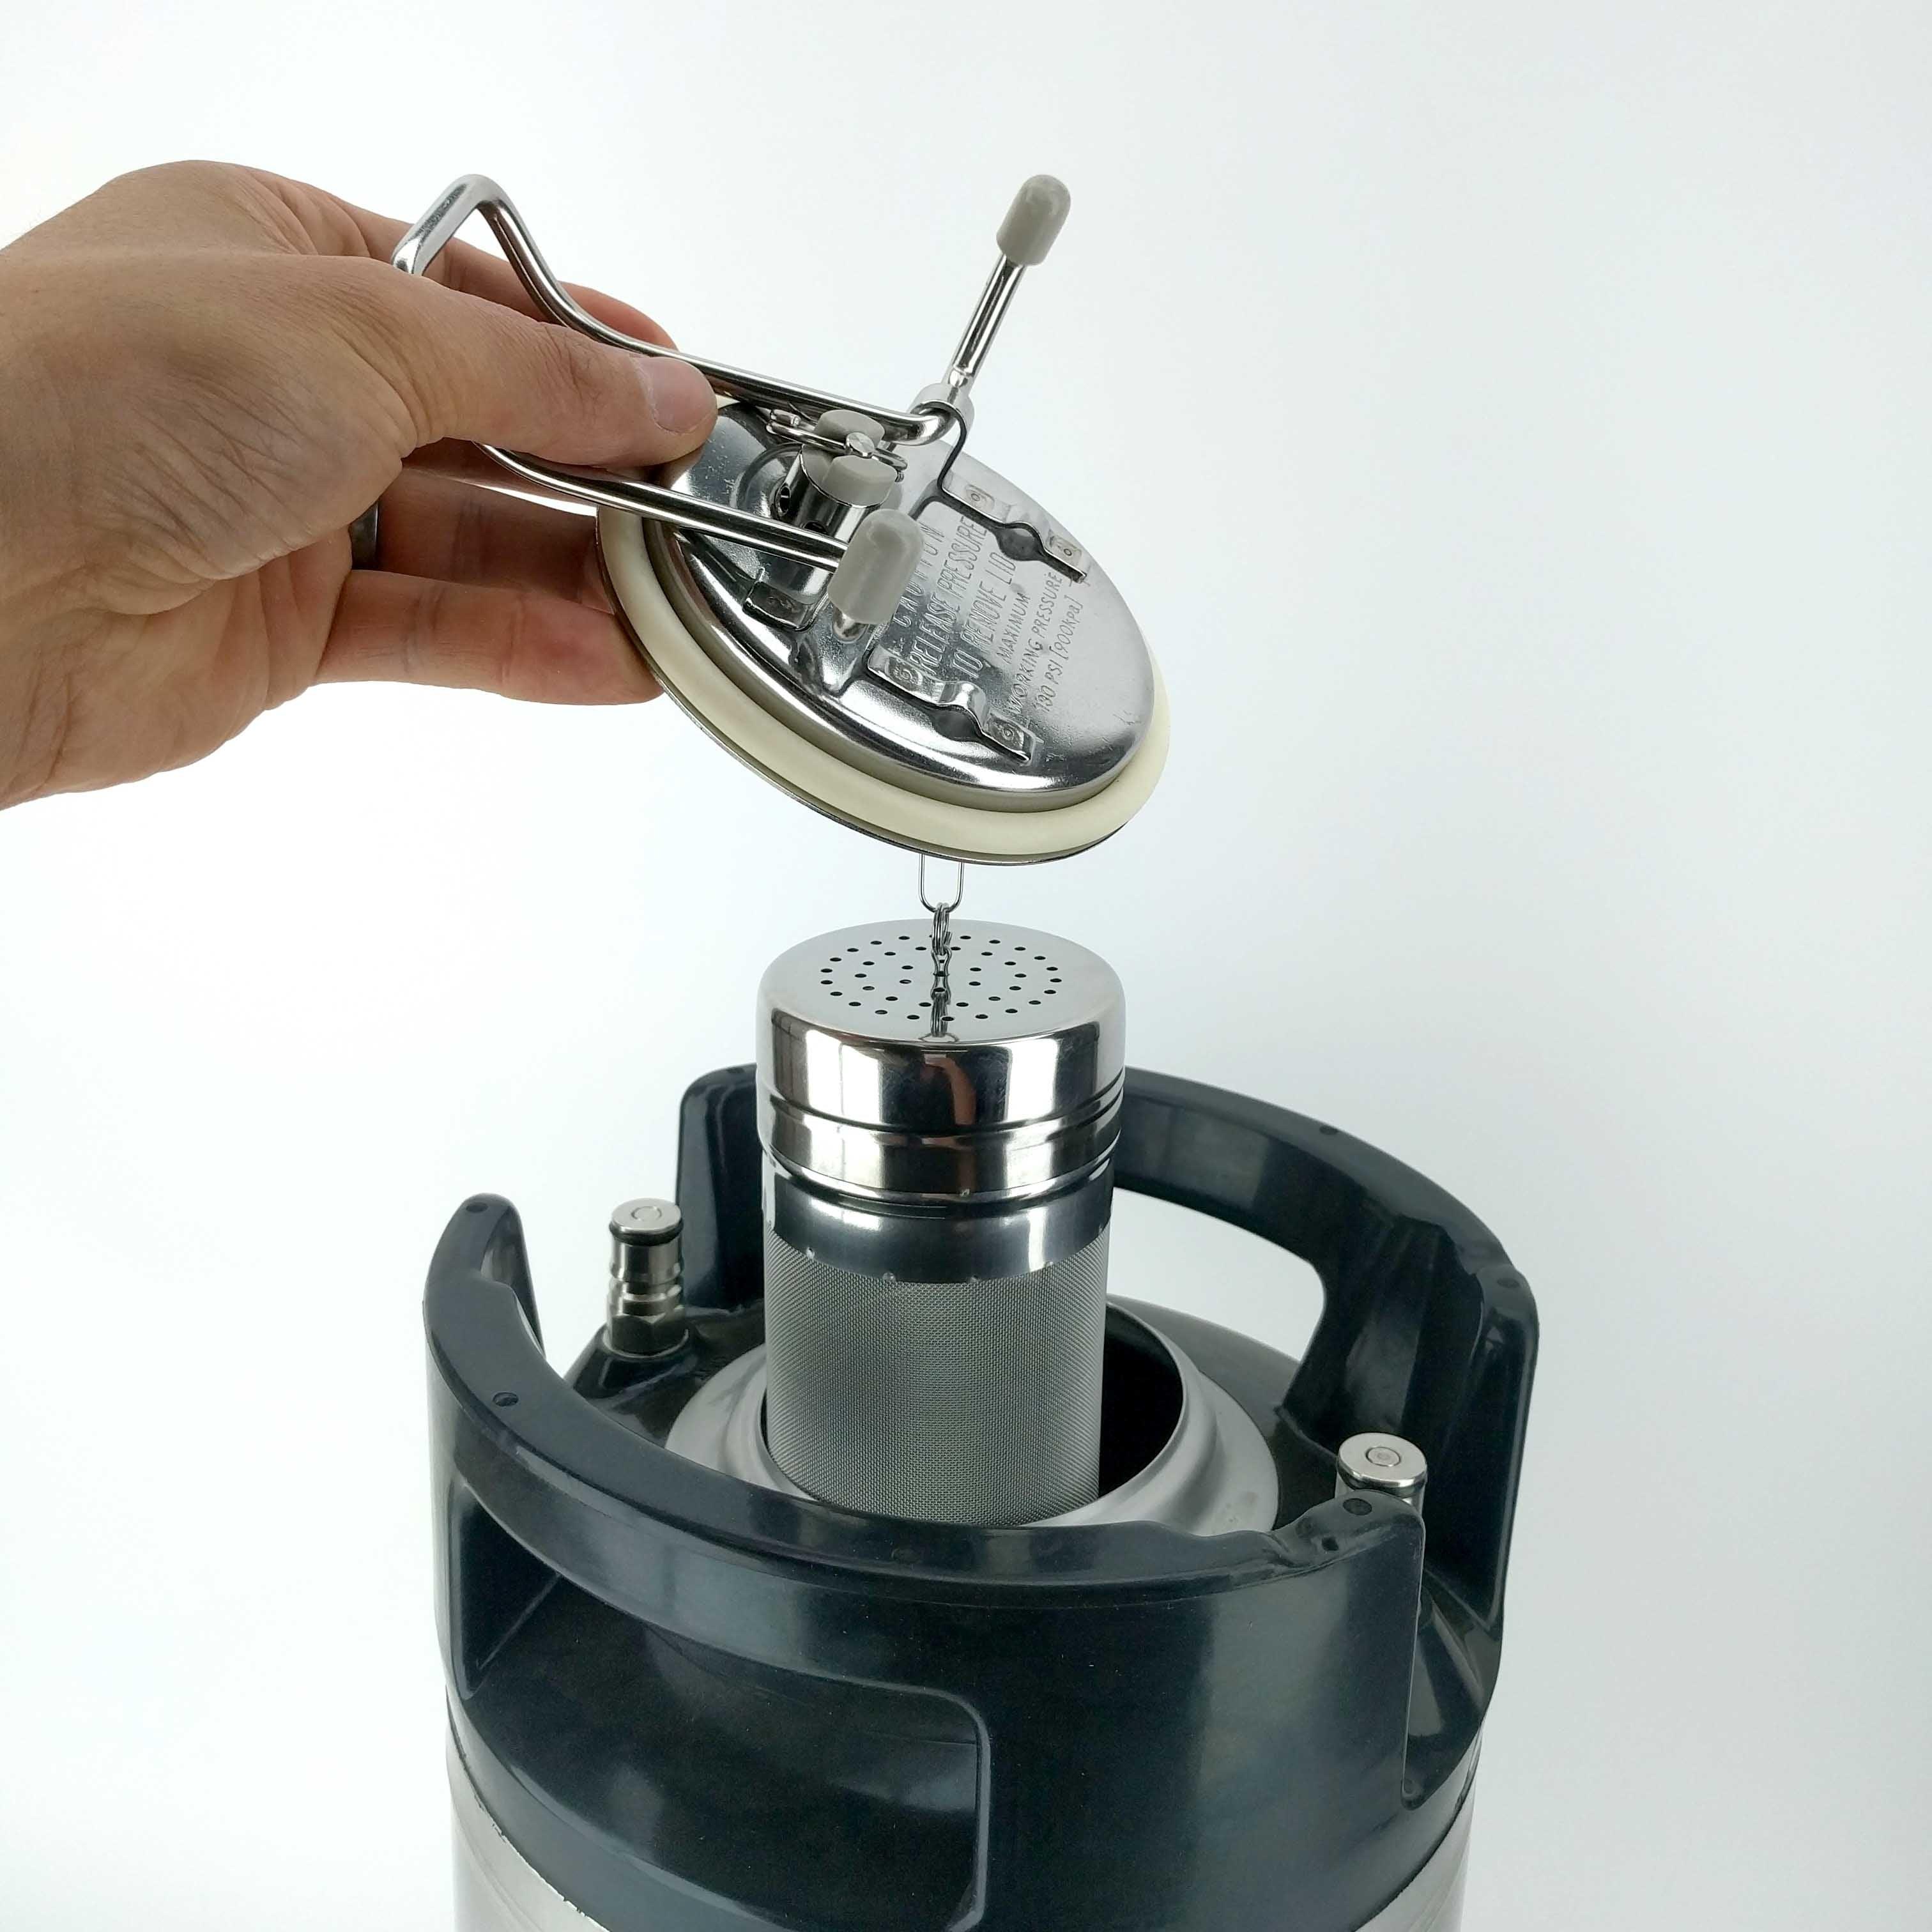 9.5L Ball Lock Keg with rubber base and handle - KegLand